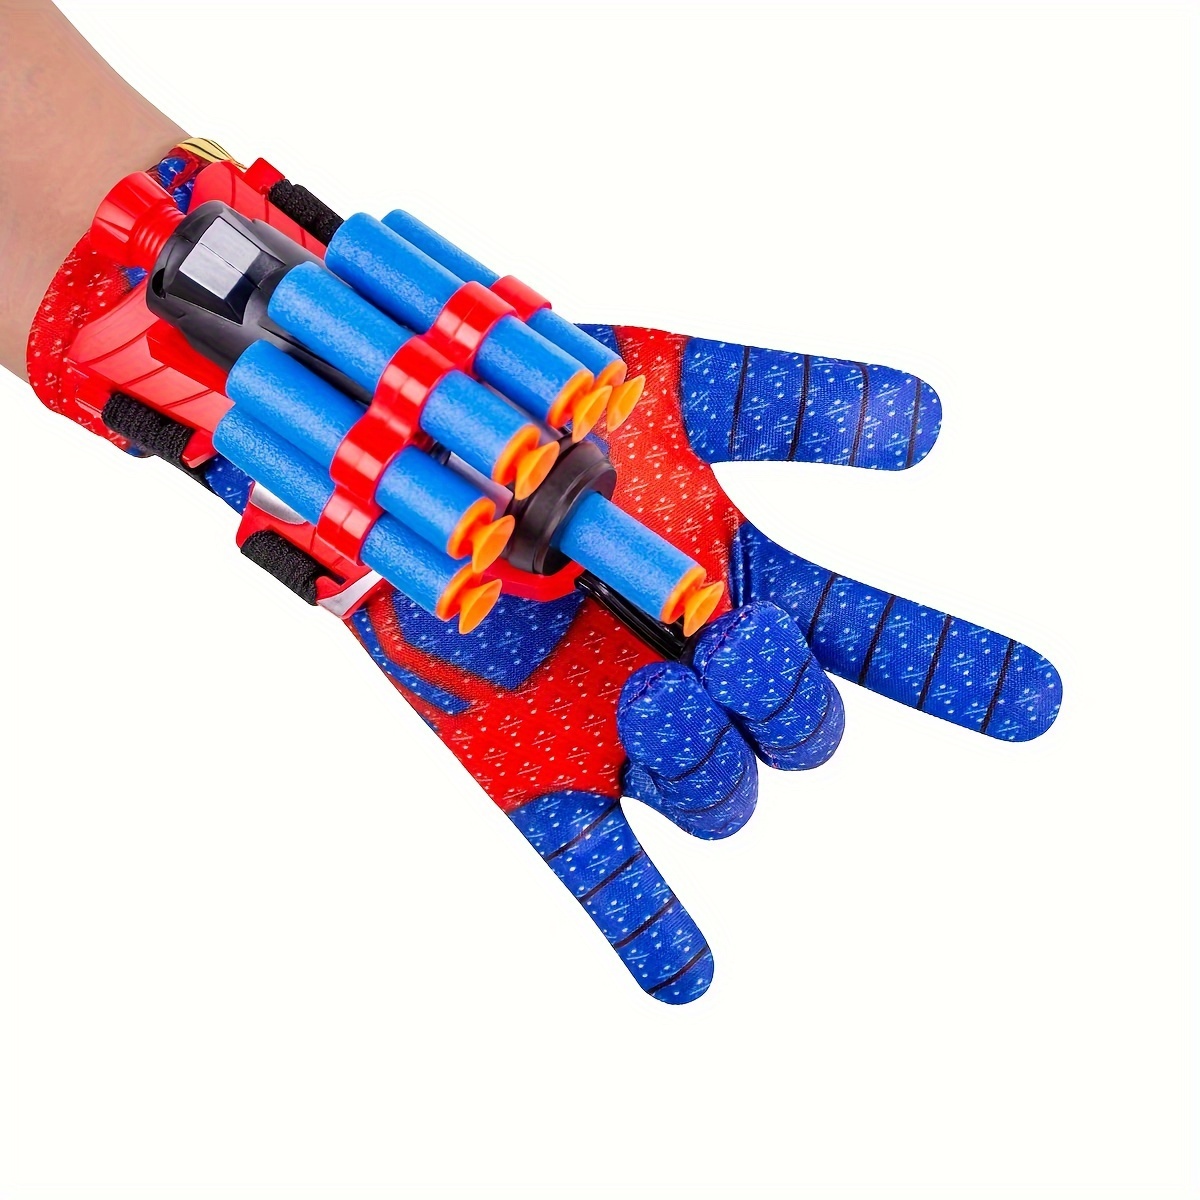 

playful Shooter" Kids' Spider Web Launcher Gloves - Cosplay Toy With 5 Soft Bullets & Straps, Ages 3-8